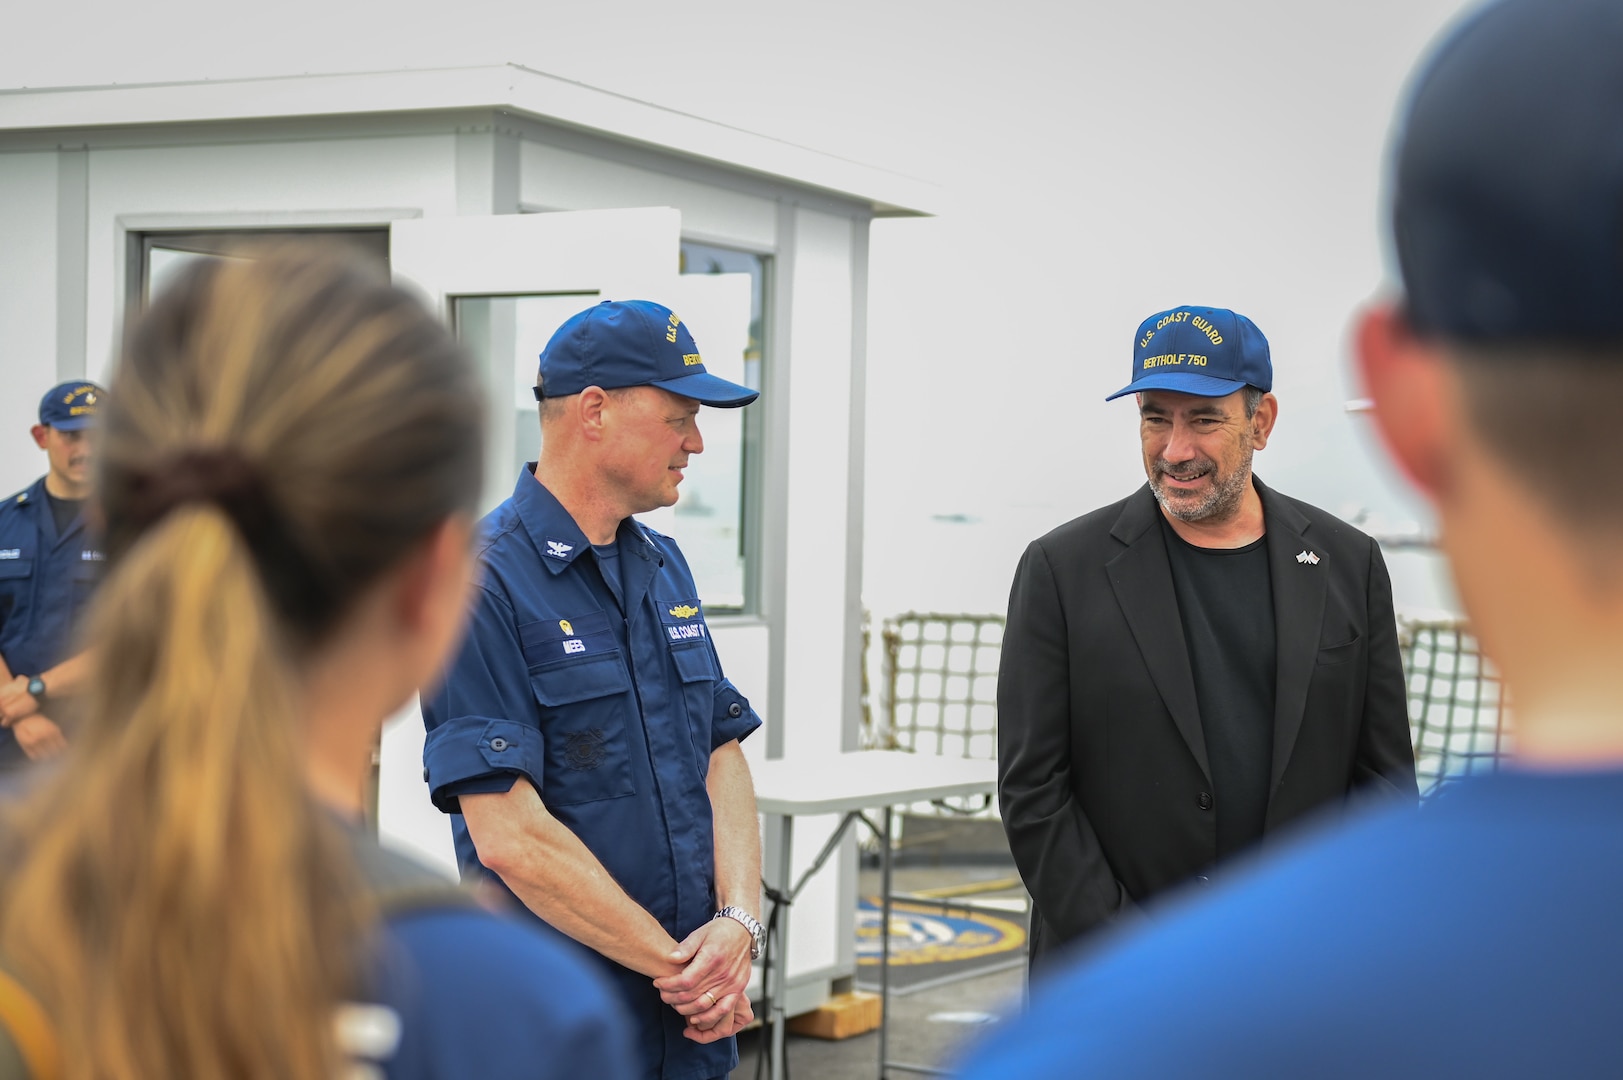 Mr. Jonathan Kaplan, U.S. Ambassador to Singapore, speaks to crewmembers from U.S. Coast Guard Cutter Bertholf (WMSL 750) after completing a tour of the cutter while it was moored in Singapore, Feb. 27, 2024. The crew of the Bertholf is on a several-month deployment to promote a free and open Indo-Pacific. (U.S. Coast Guard photo by Petty Officer Steve Strohmaier)